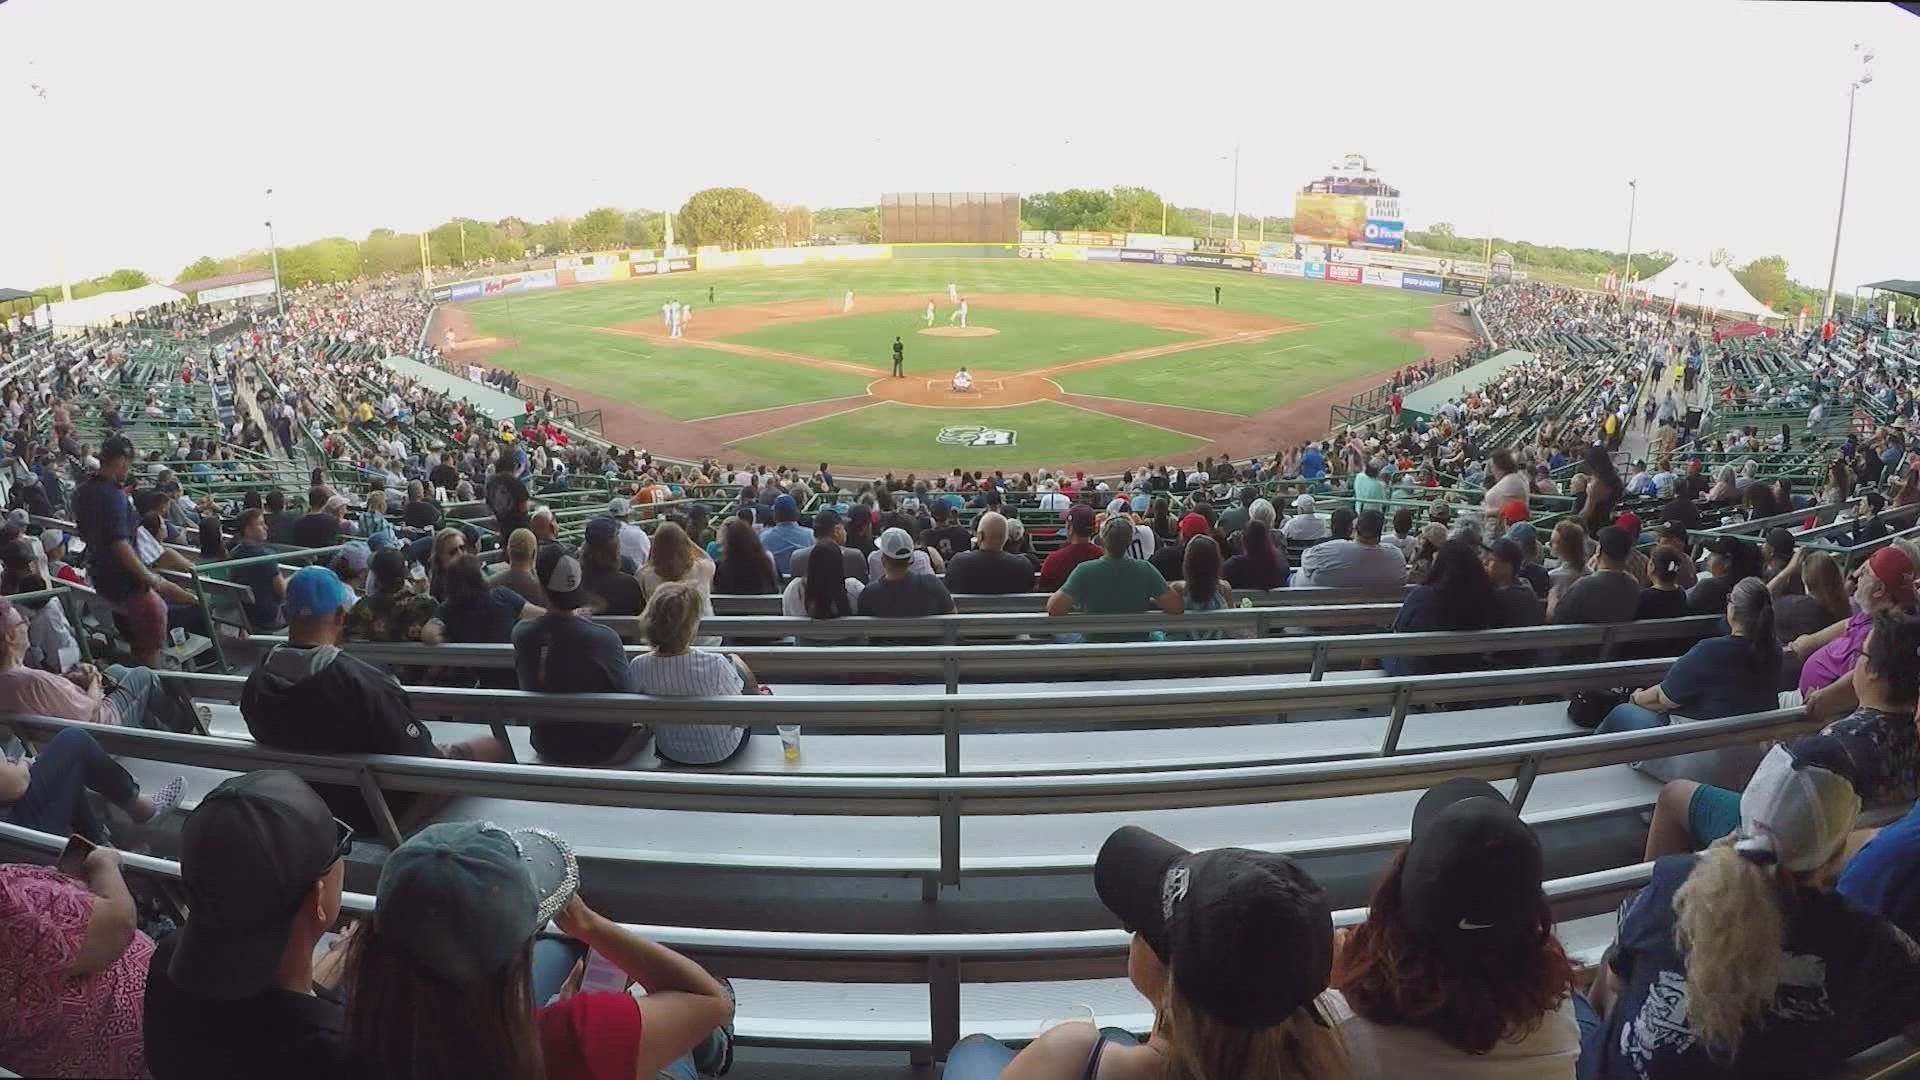 The San Antonio Missions lost in their home opener to the Frisco Rough Riders, 4-6 on Tuesday night, April 12, 2022, at Nelson Wolff Stadium.